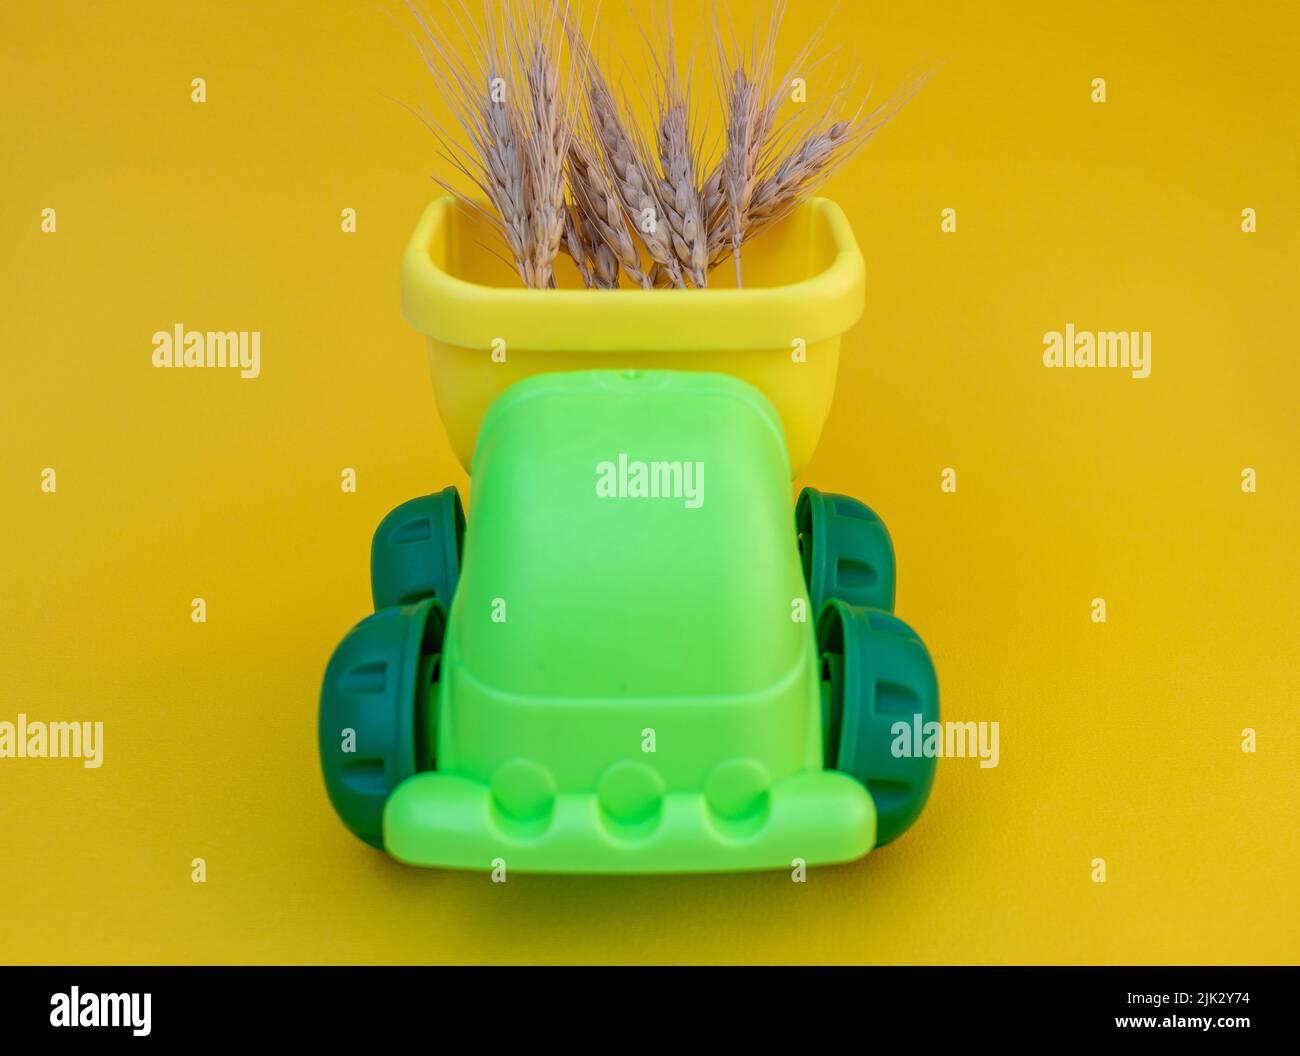 Global food crisis concept. Truck transporting wheat grains Stock Photo